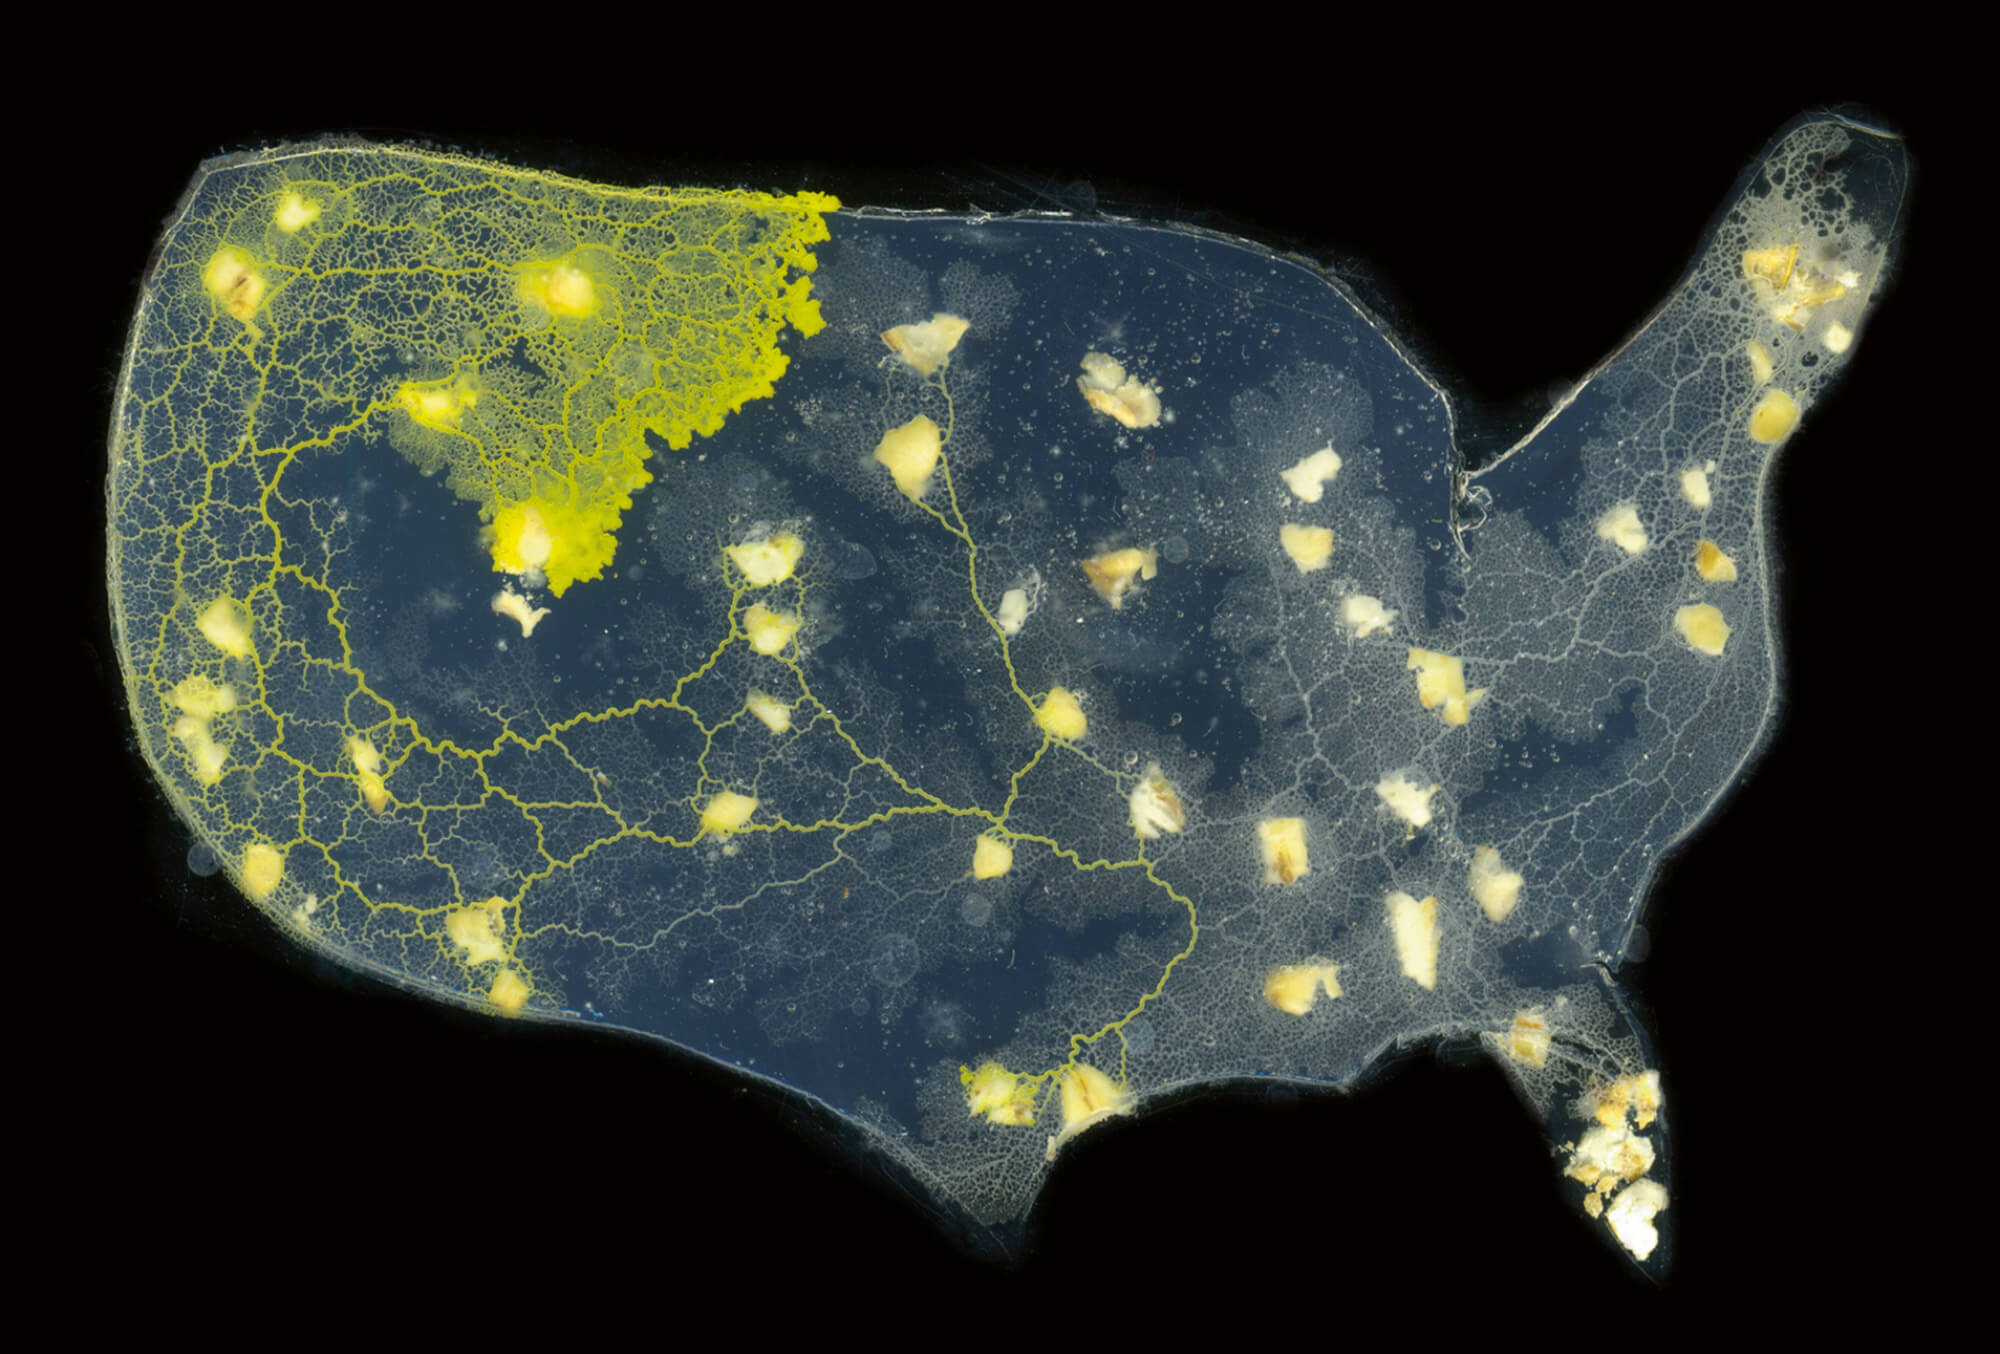 Hacking the wood-wide web. The slime mold Physarum polycephalum is used in laboratories across the world to map more efficient highway and subway networks. Here, in an experiment staged at the International Center of Unconventional Computing at the University of the West of England, the mold is redrawing the US interstate highway system. Photo Andy Adamatzky.